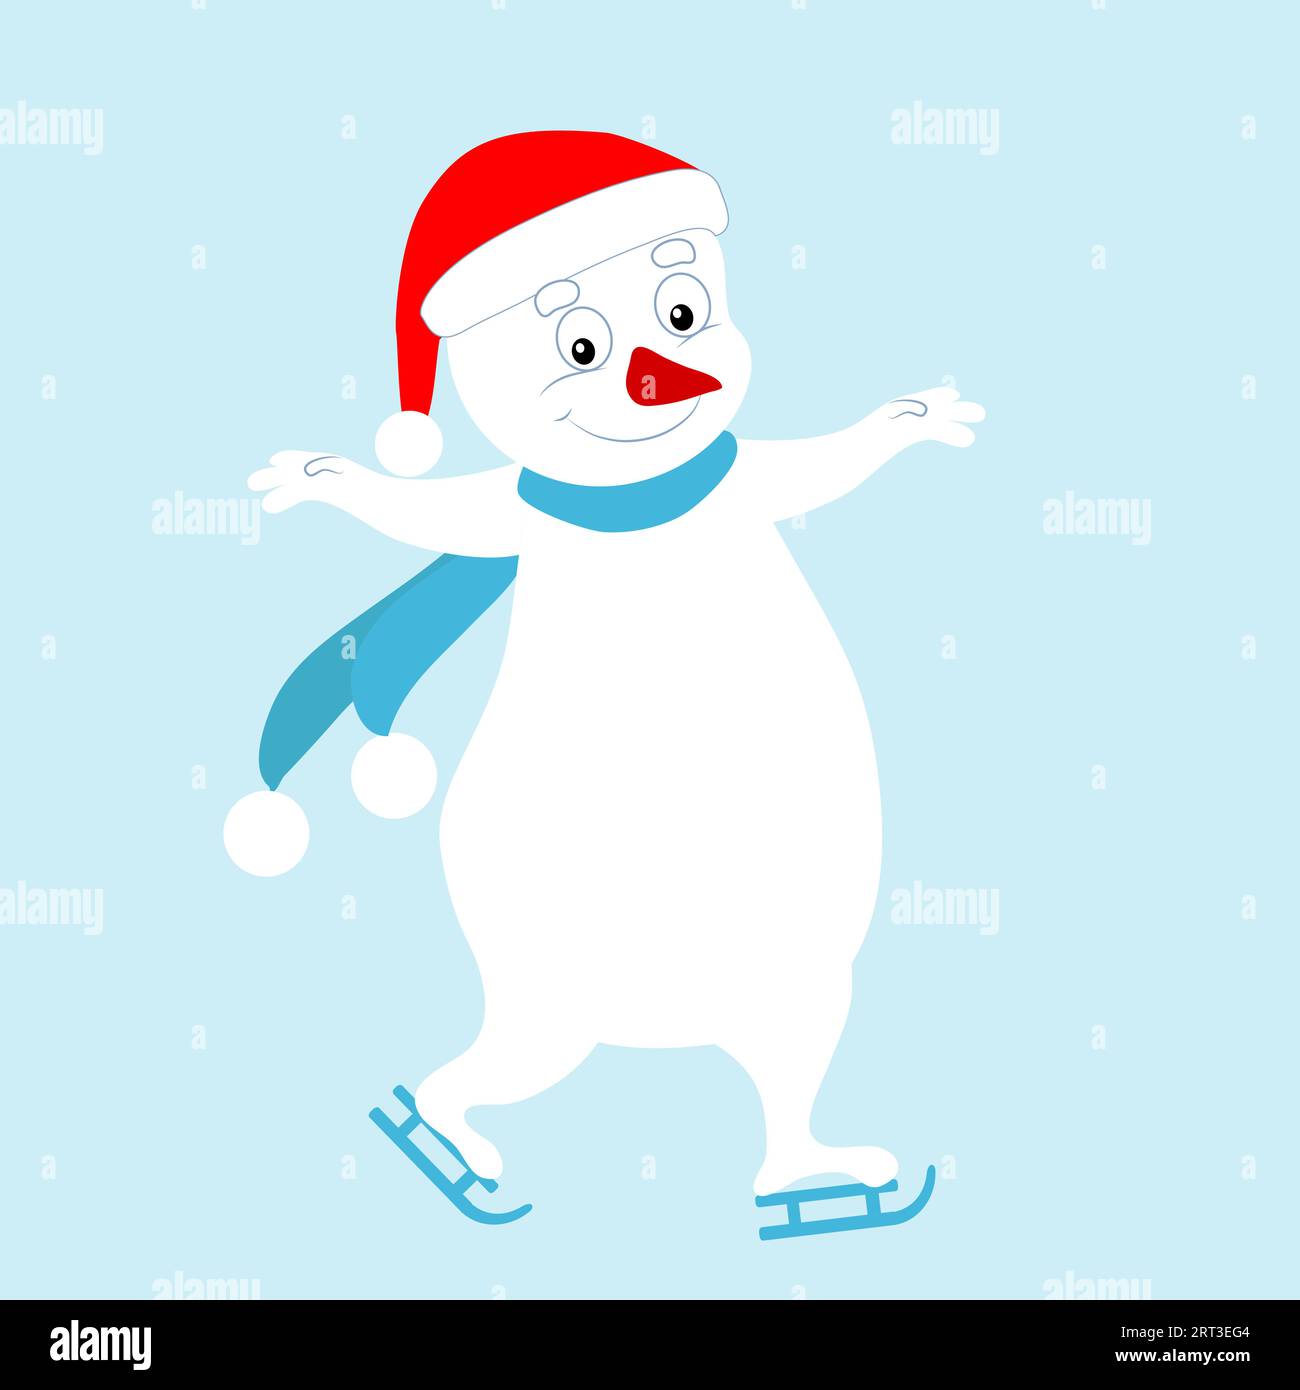 The snowman is ice skating, he is cheerful and cute. Cartoon vector winter character. Picture for Christmas cards, Christmas balls and holiday decor. Stock Vector